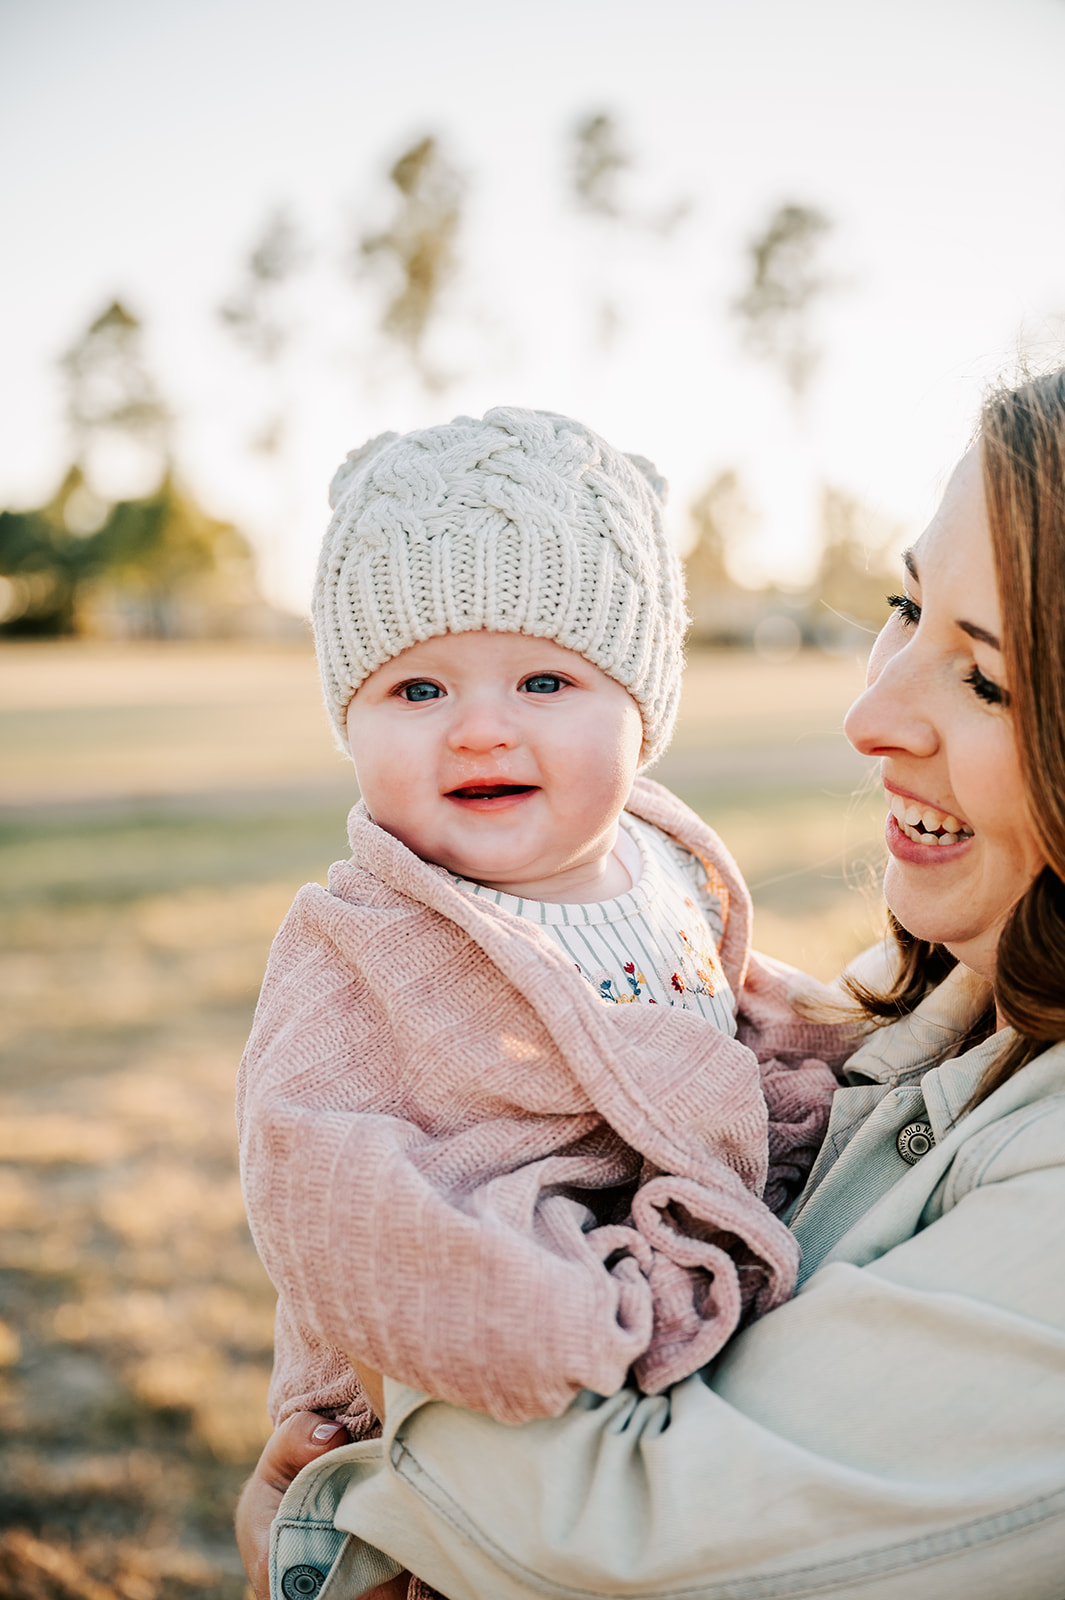 A mother stands in a park at sunset holding her toddler daughter in a pink sweater and knit hat